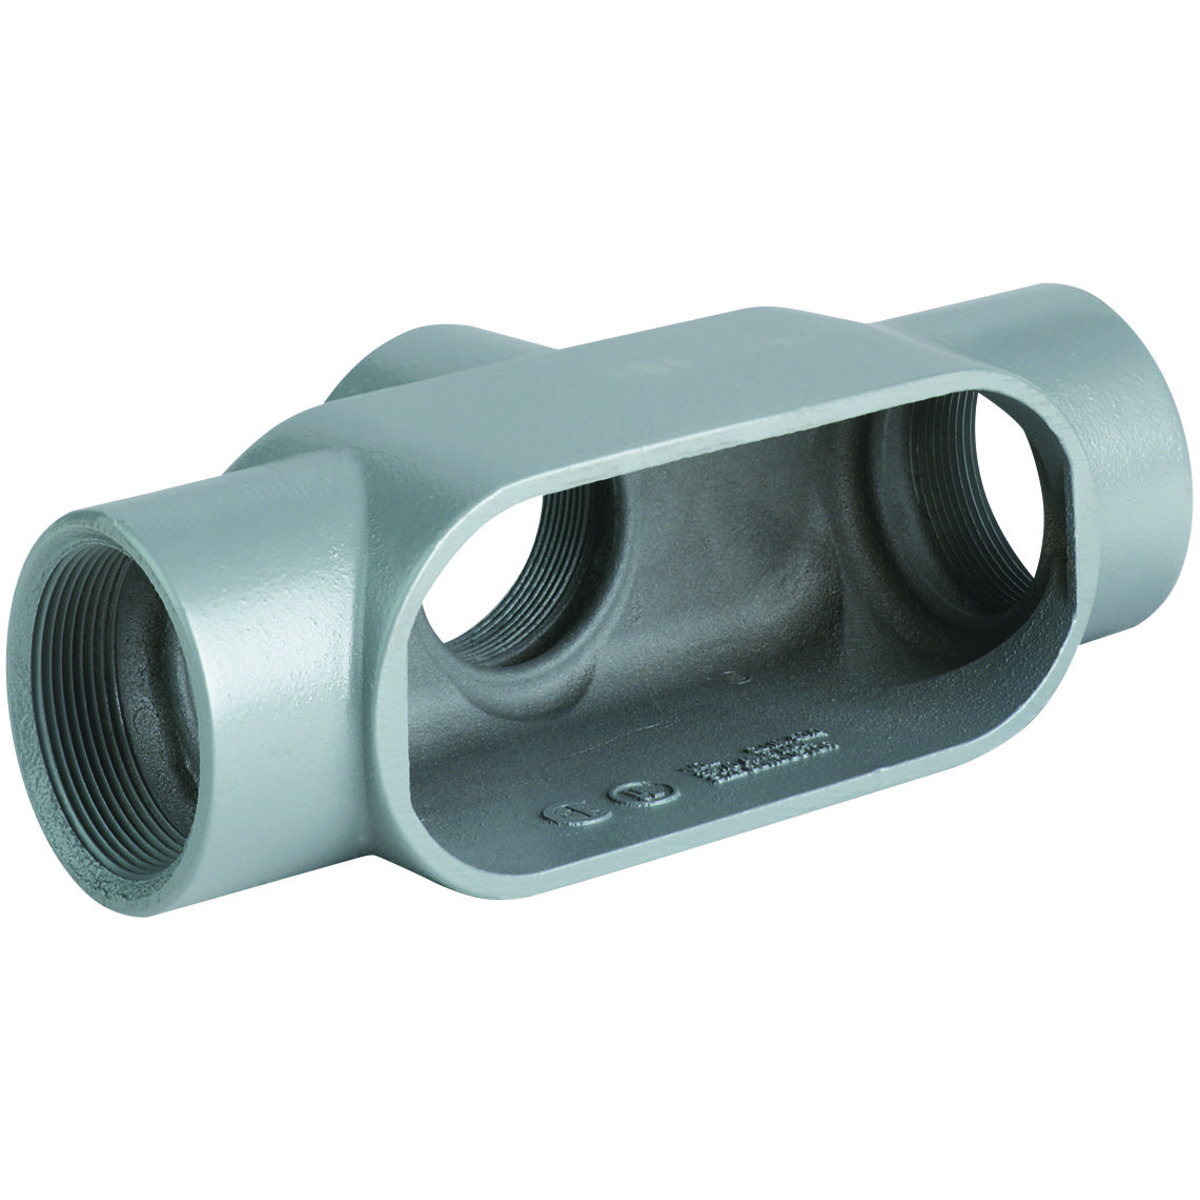 DURALOY 7 SERIES - IRON CONDUIT BODY - TB TYPE - HUB SIZE 1-1/2 INCH -VOLUME 27.0 CUBIC INCHES